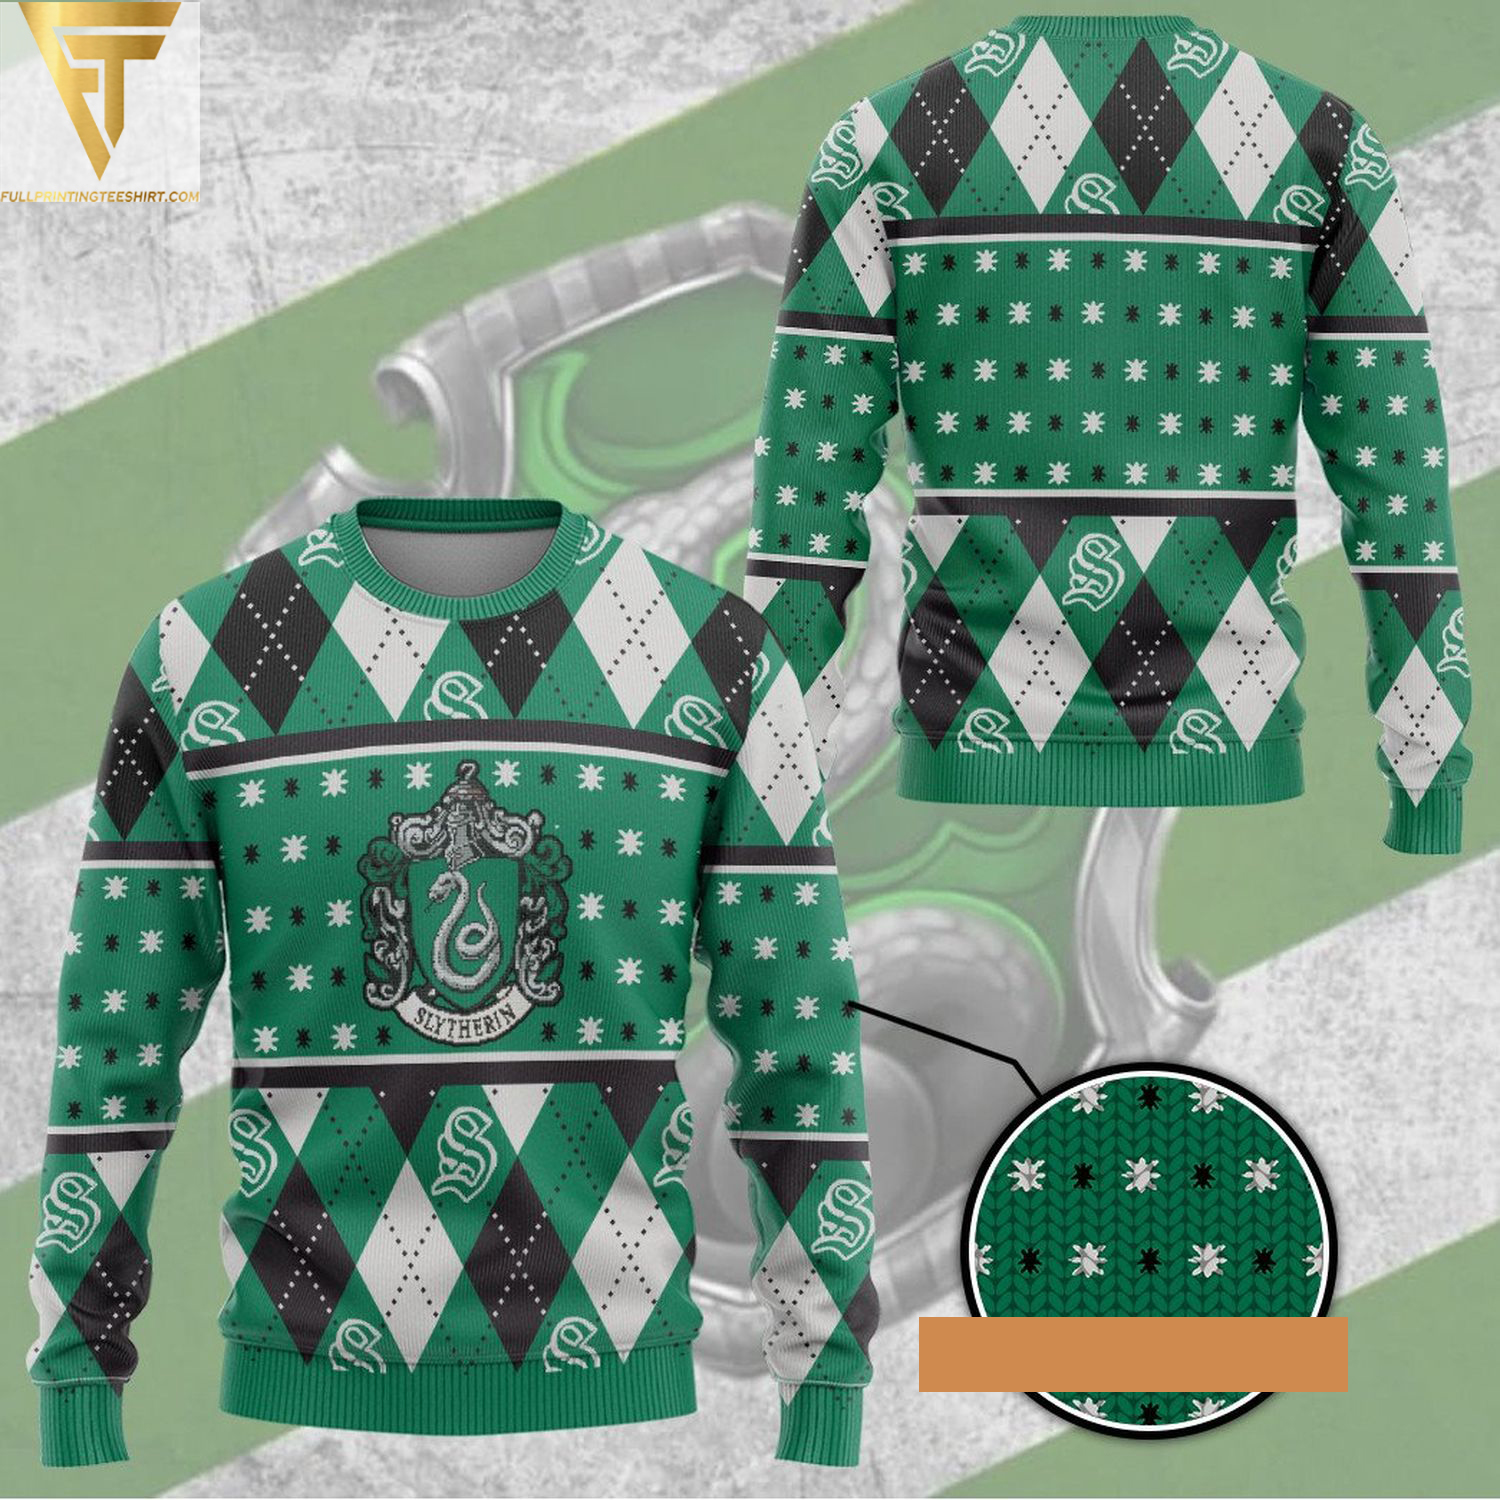 Harry potter slytherin crest holiday ugly christmas sweater